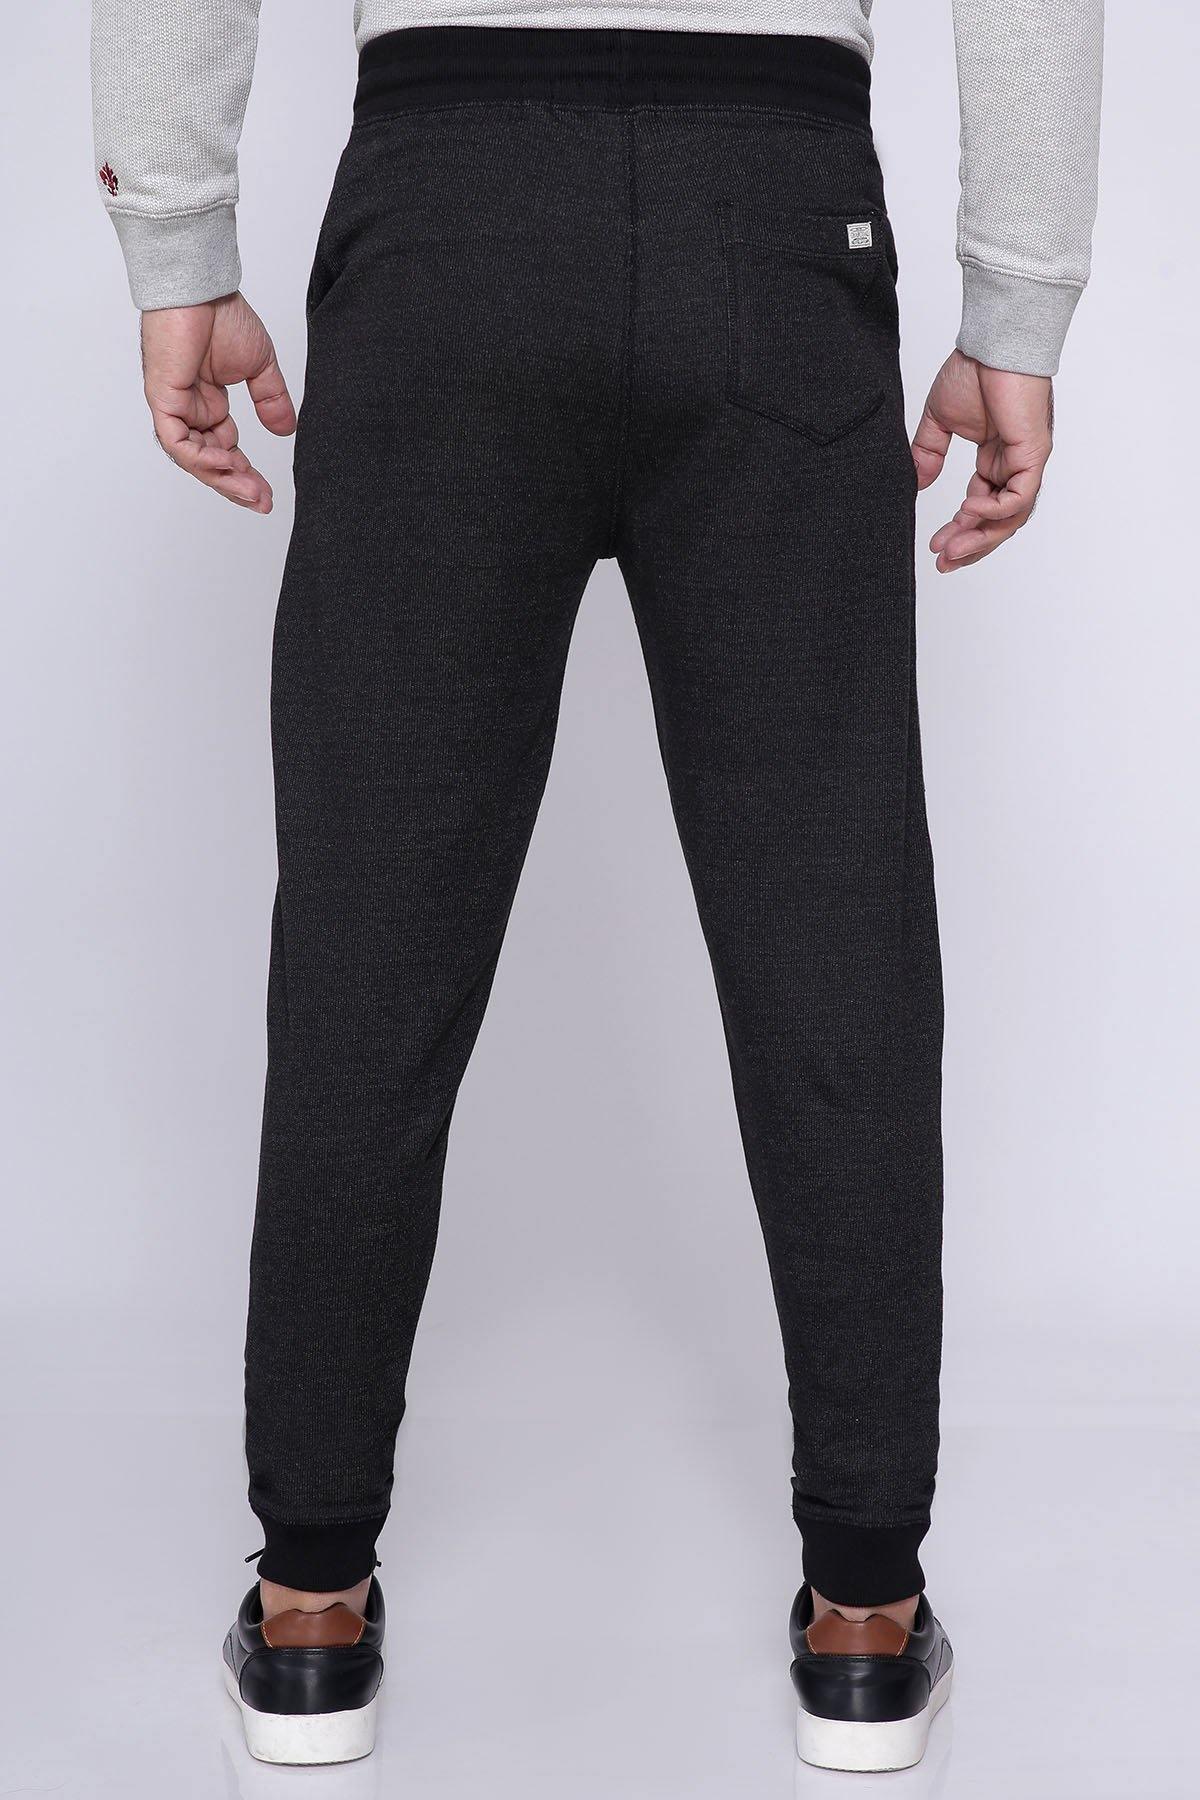 CHAIN YARN TROUSER BLACK at Charcoal Clothing